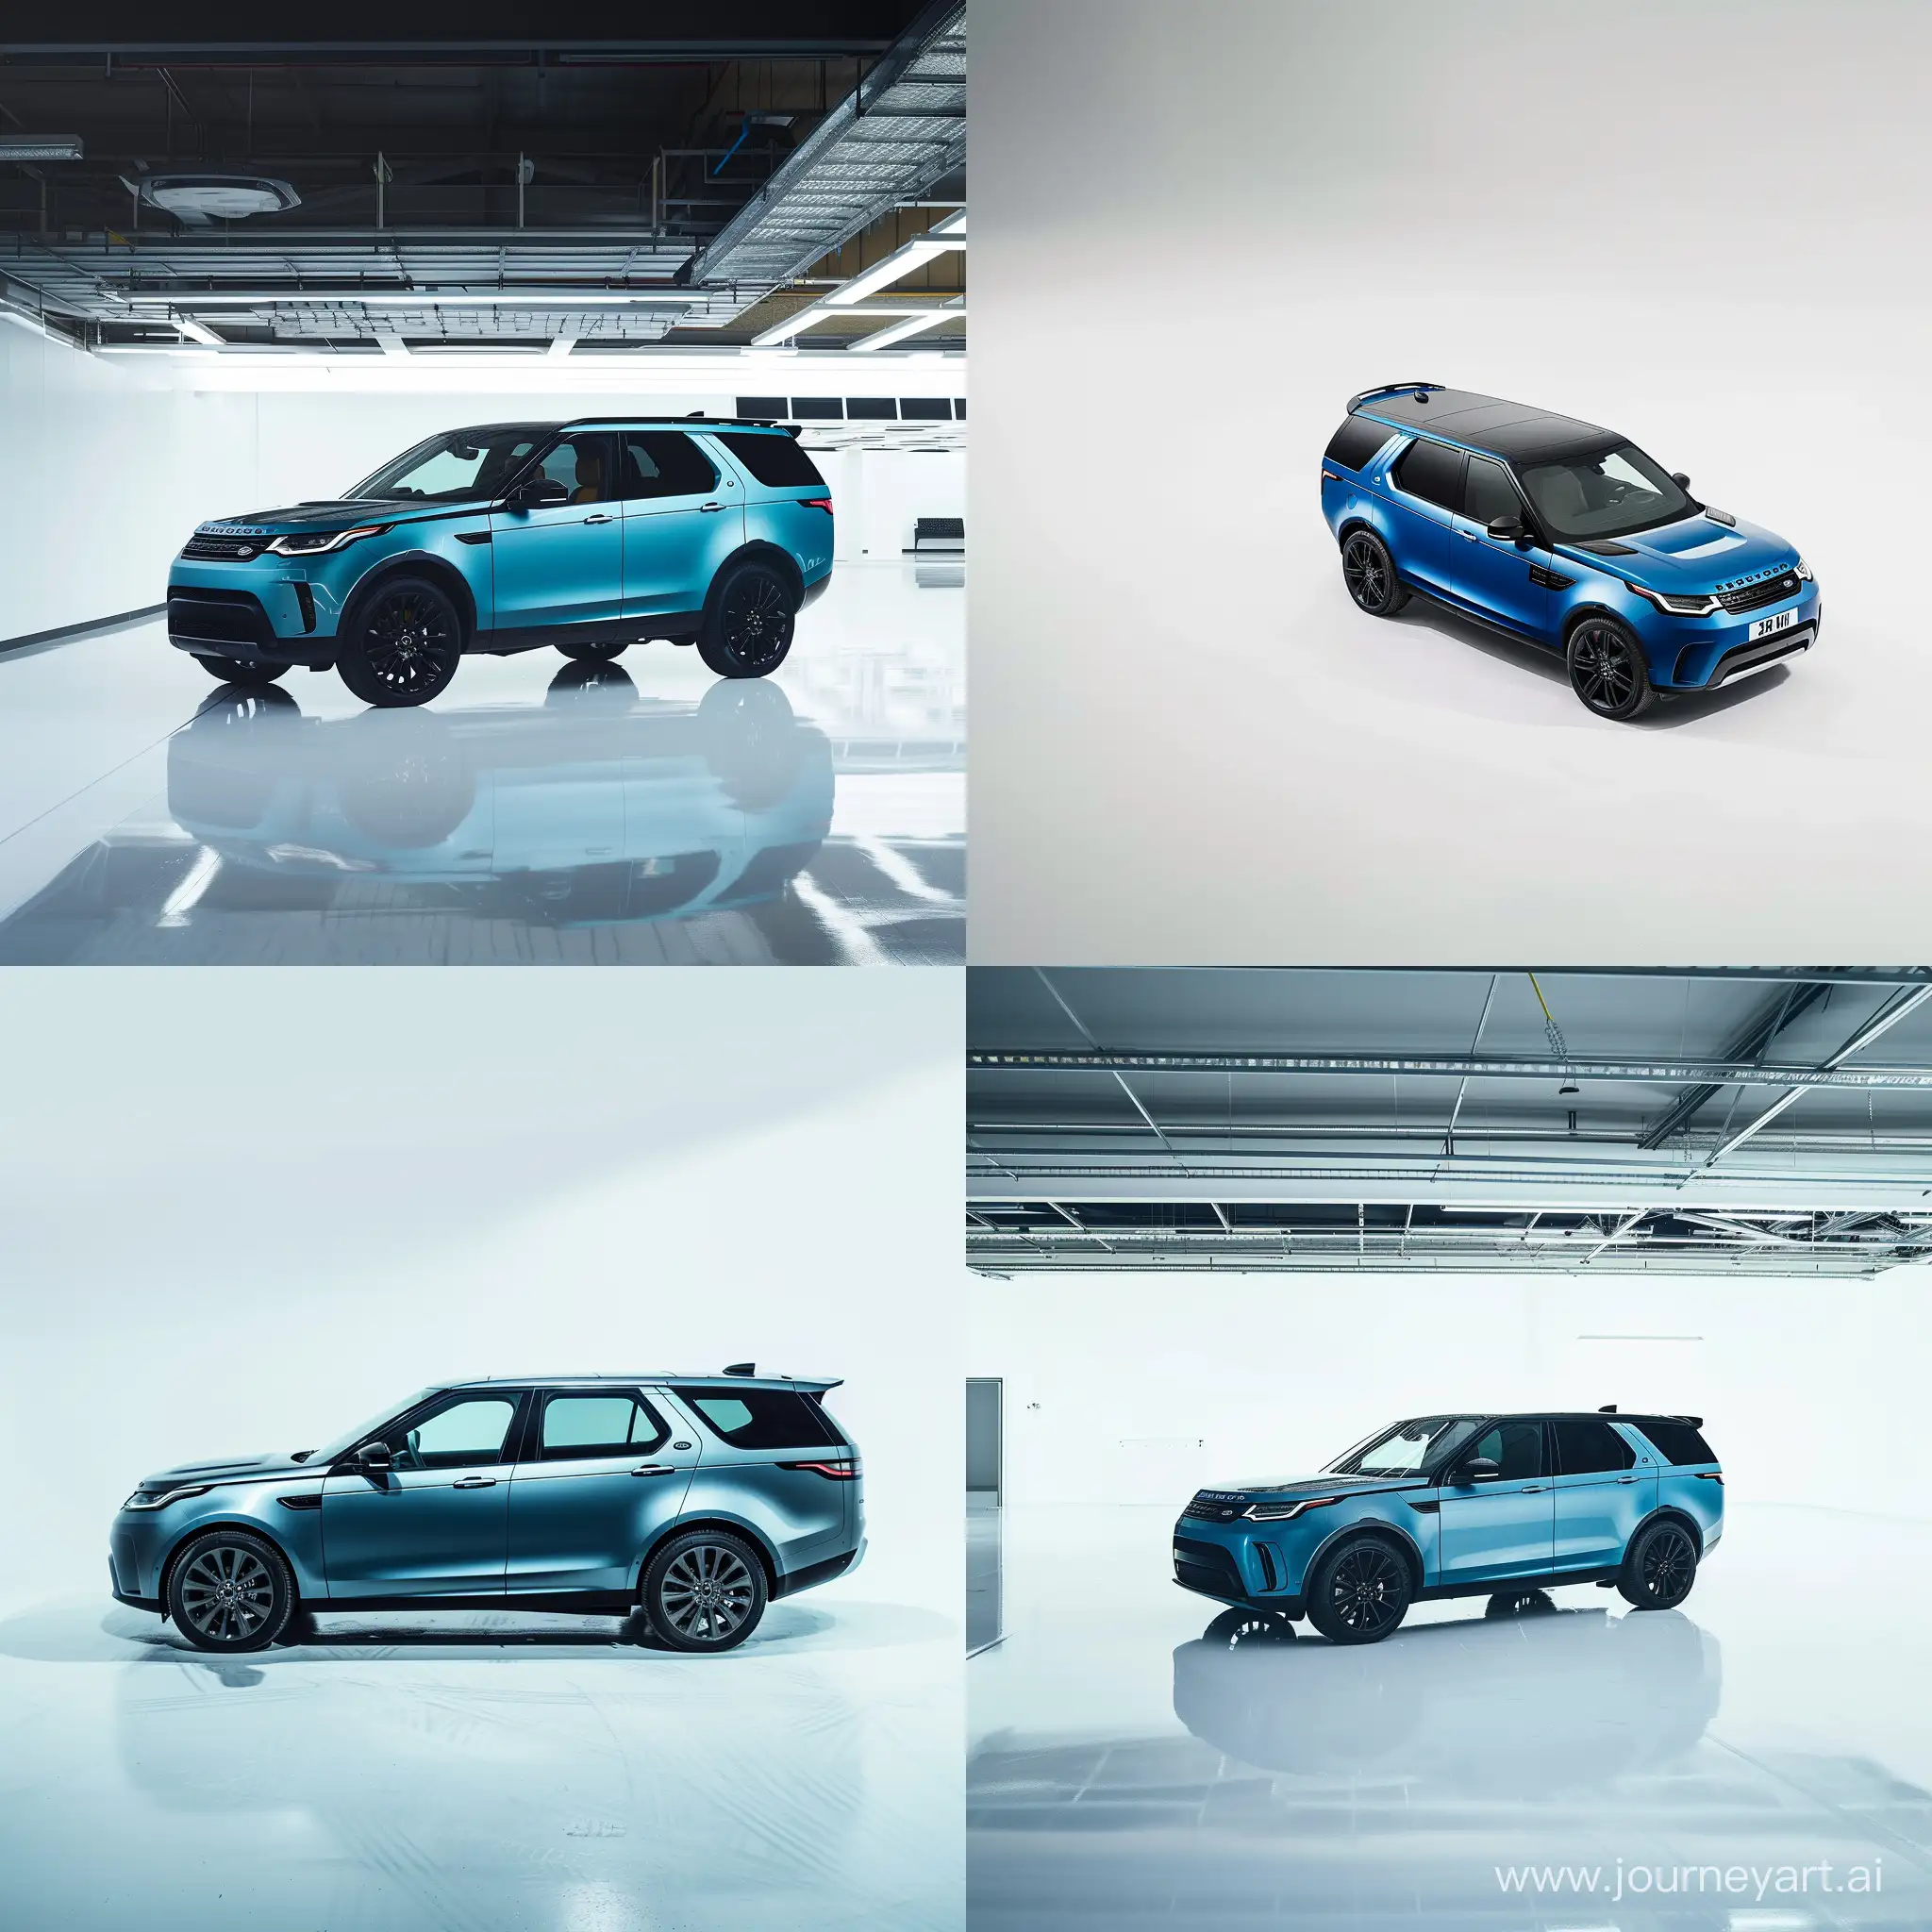 HighQuality-Blue-Landrover-Discovery-2023-in-White-Room-Sport-Pose-Photography